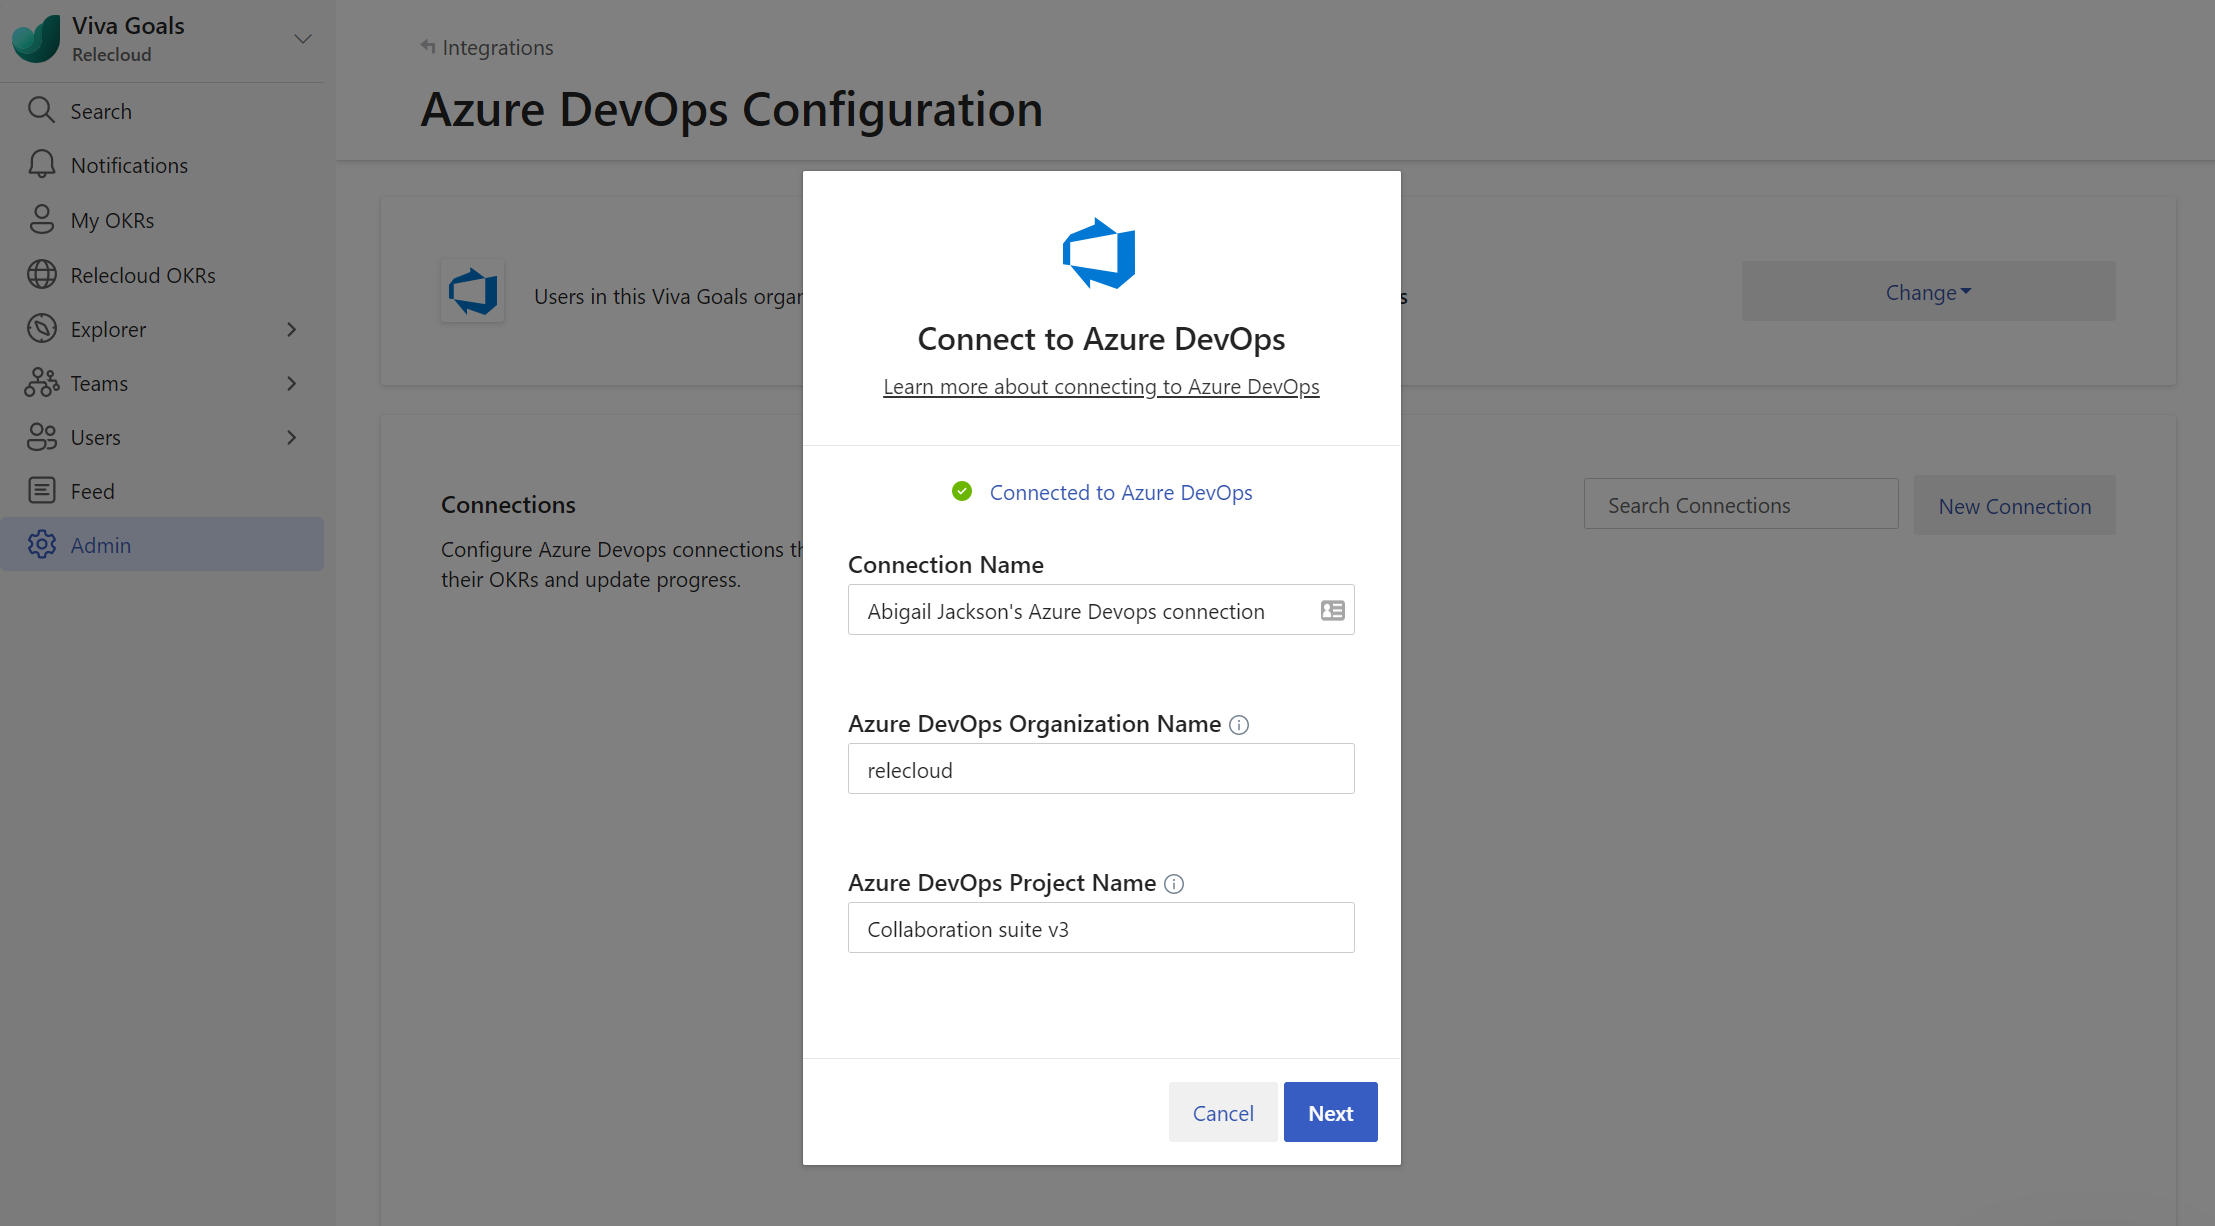 Screenshot shows where you fill in details for a new Azure DevOps connection in Viva goals.